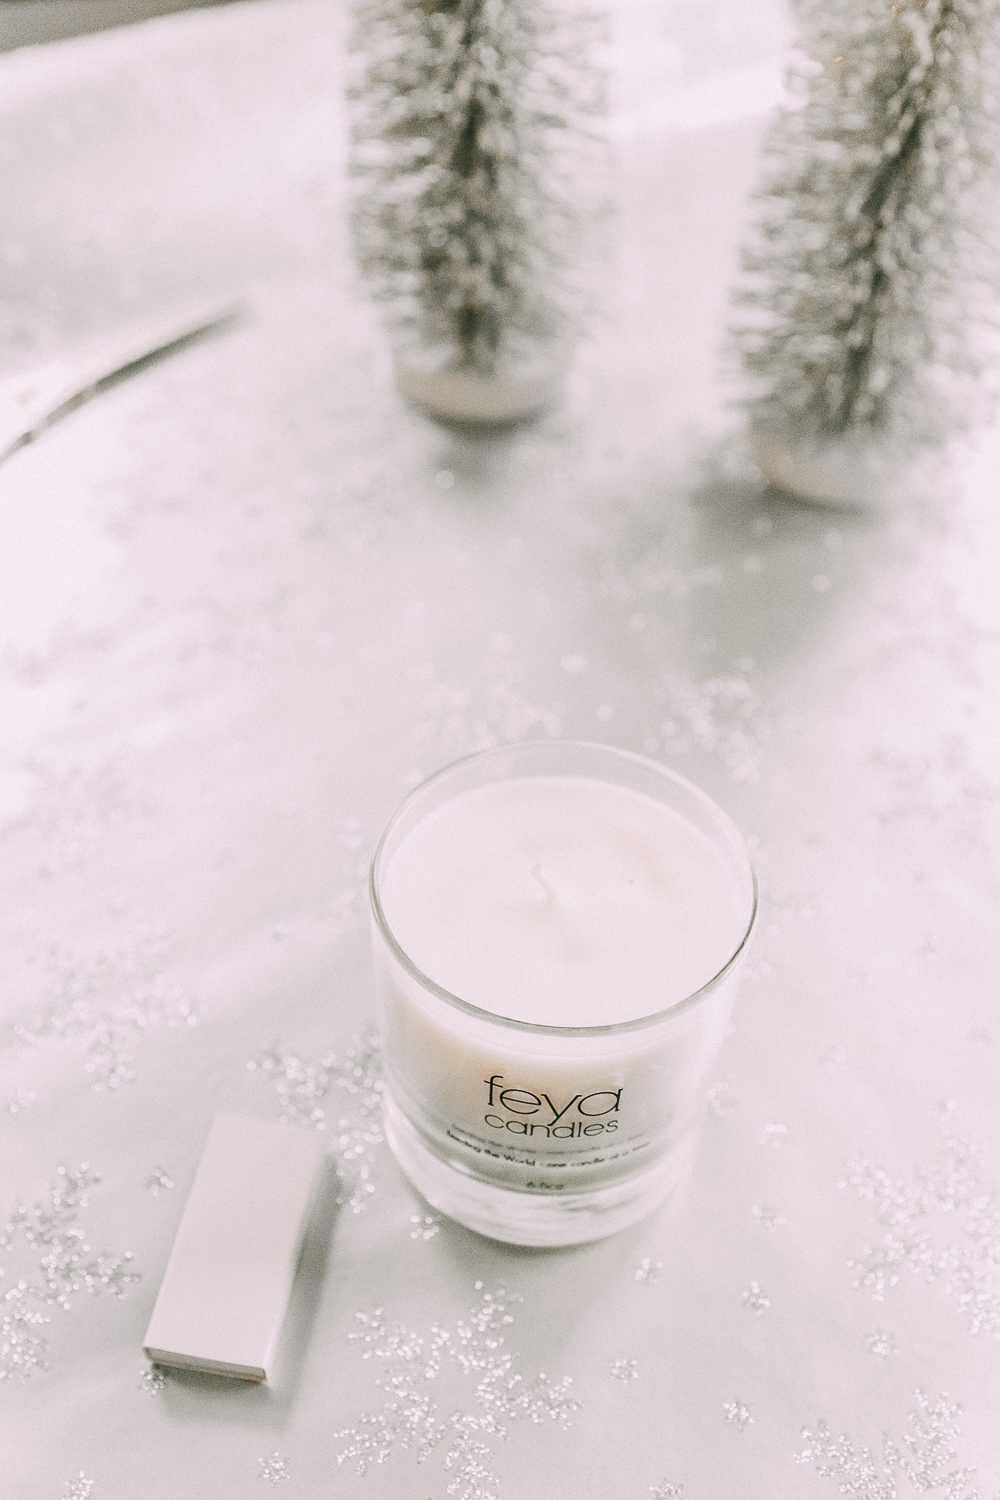 holiday gift ideas from JCPenney featuring a Feya holiday cheer boxed soy candle